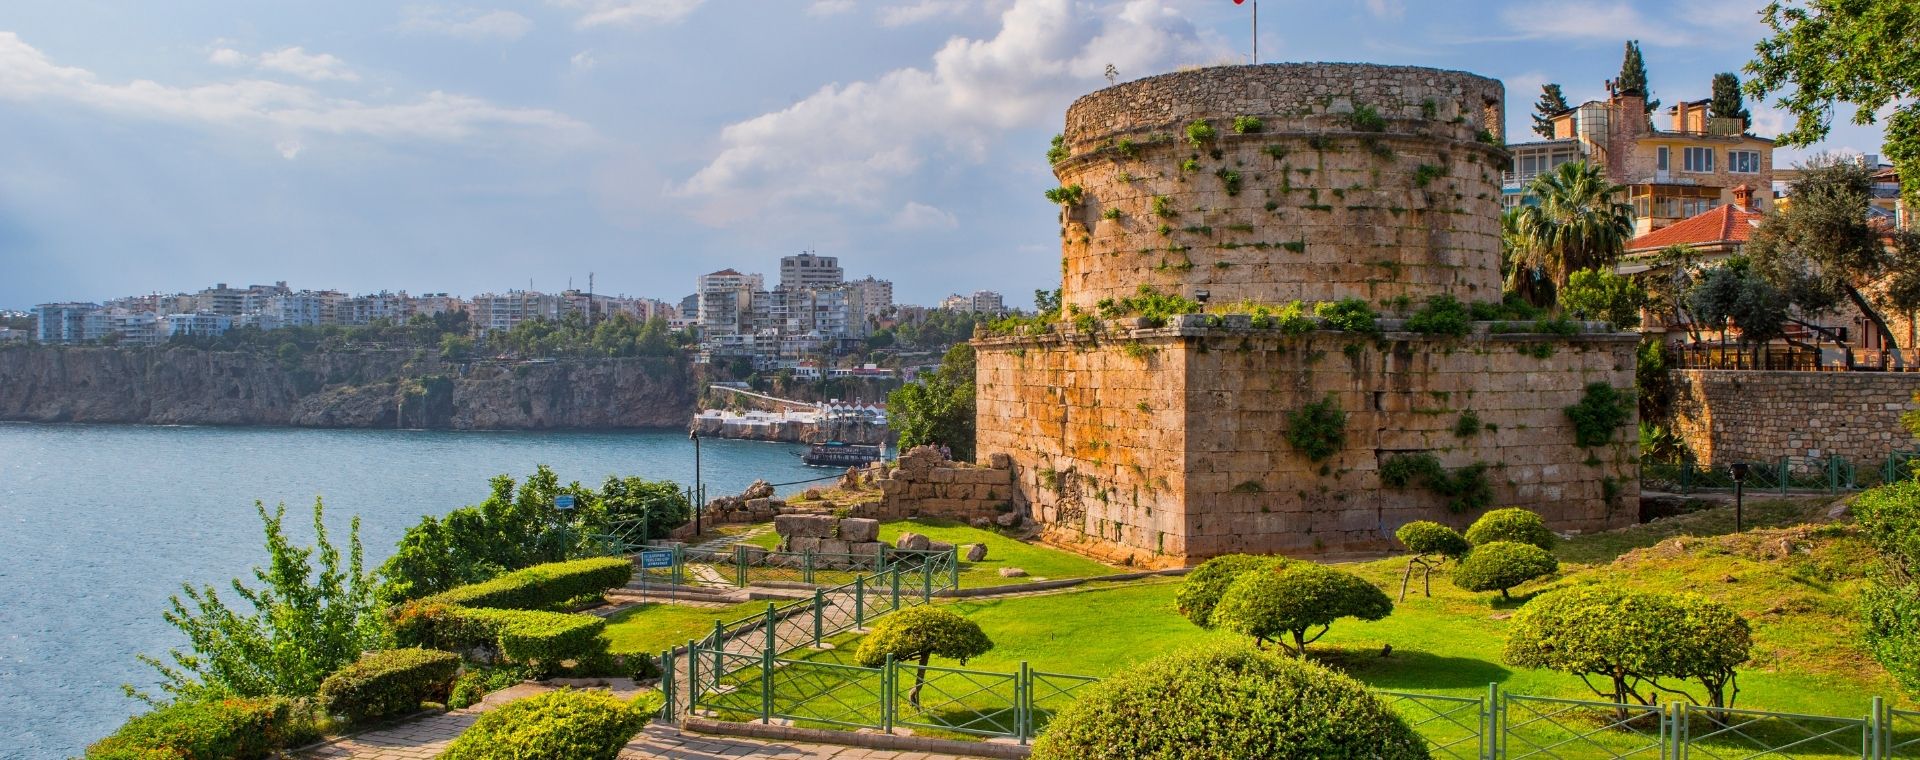 HOW TO BUY REAL ESTATE IN ANTALYA?